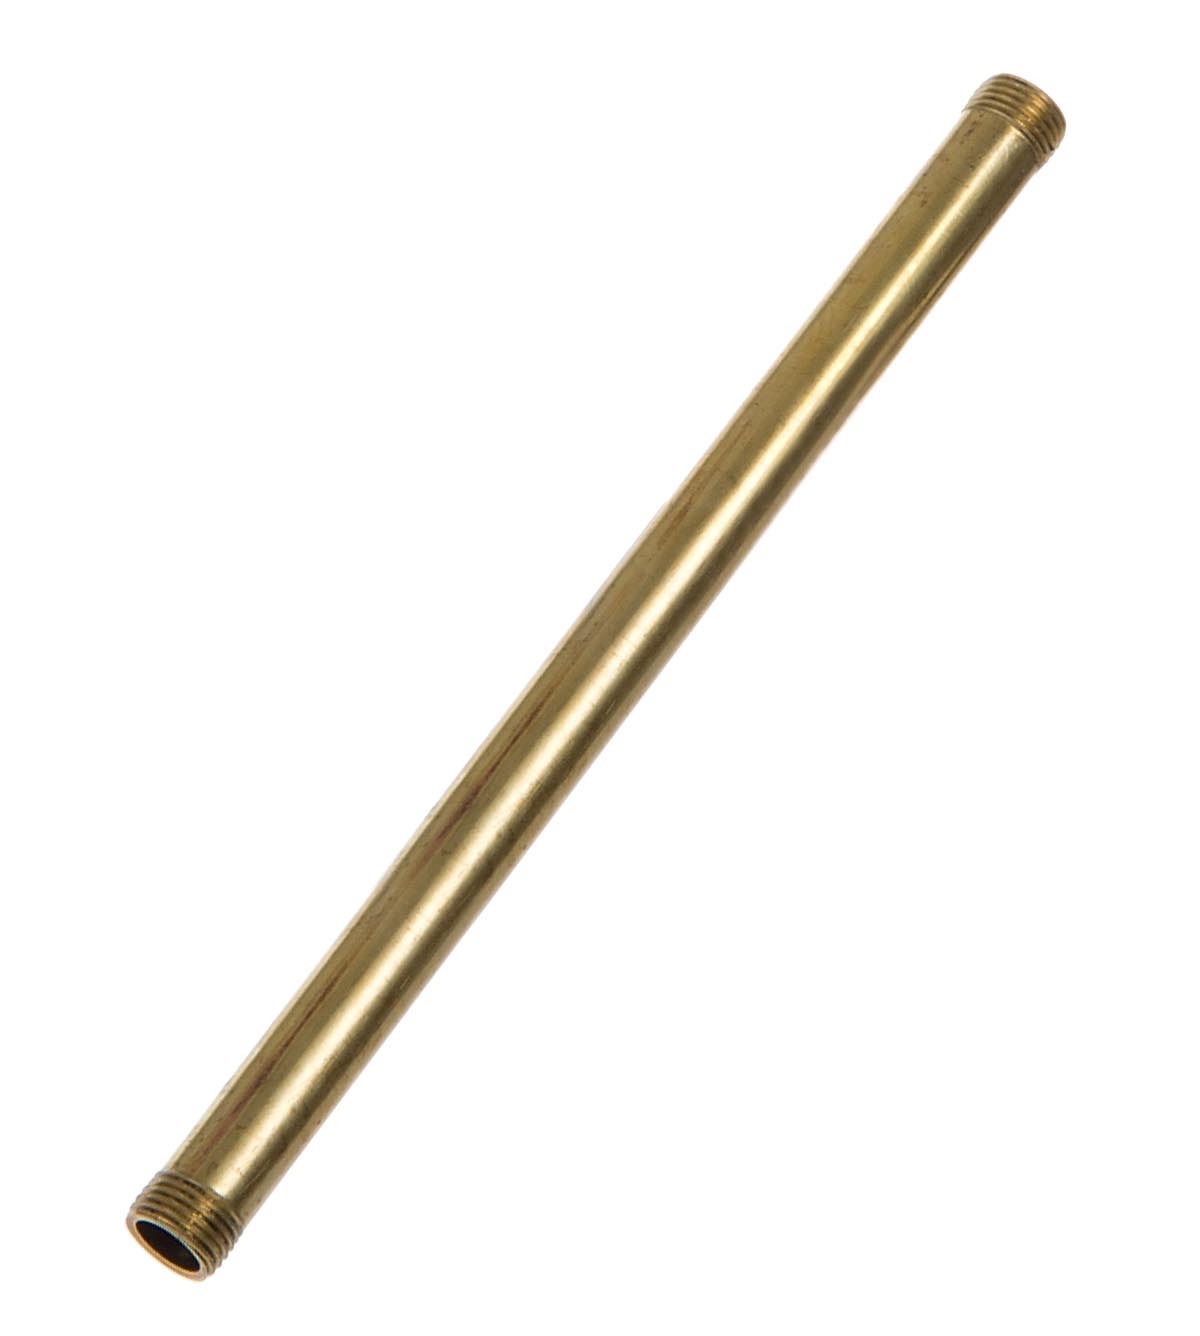 1/8 IP x 3/16, Threaded Fixture Stem Lamp Pipe, Choice of Lengths from 1-1/2 to 36 (22249BU)